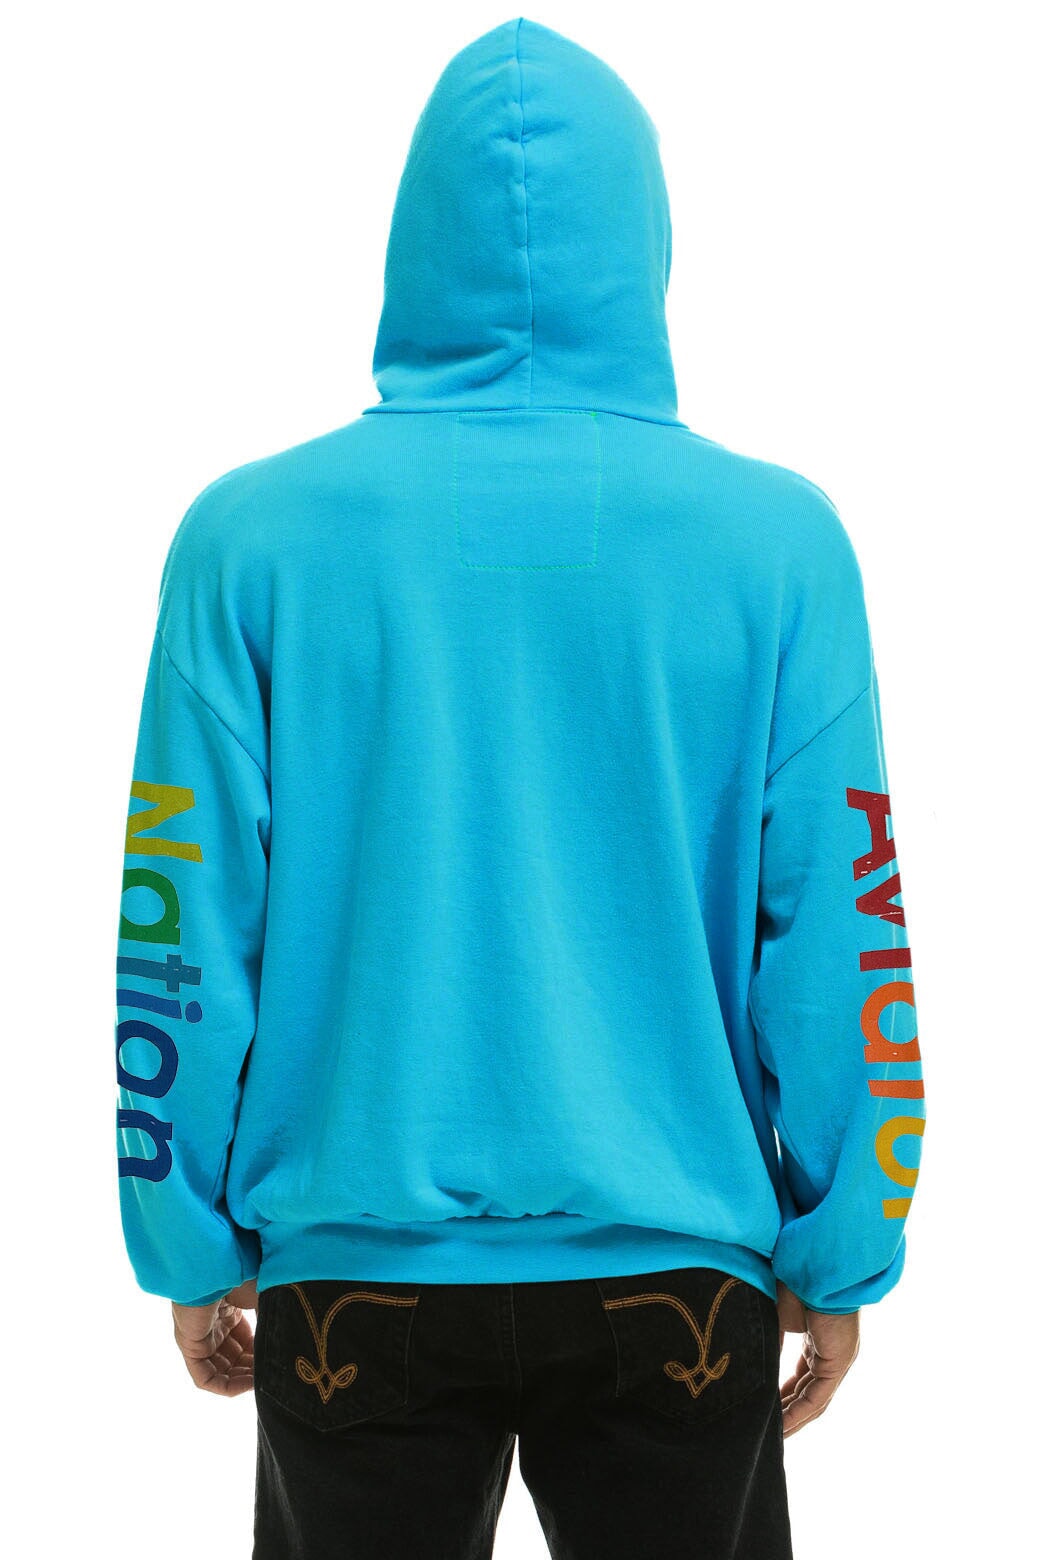 AVIATOR NATION NASHVILLE RELAXED PULLOVER HOODIE - NEON BLUE Hoodie Aviator Nation 